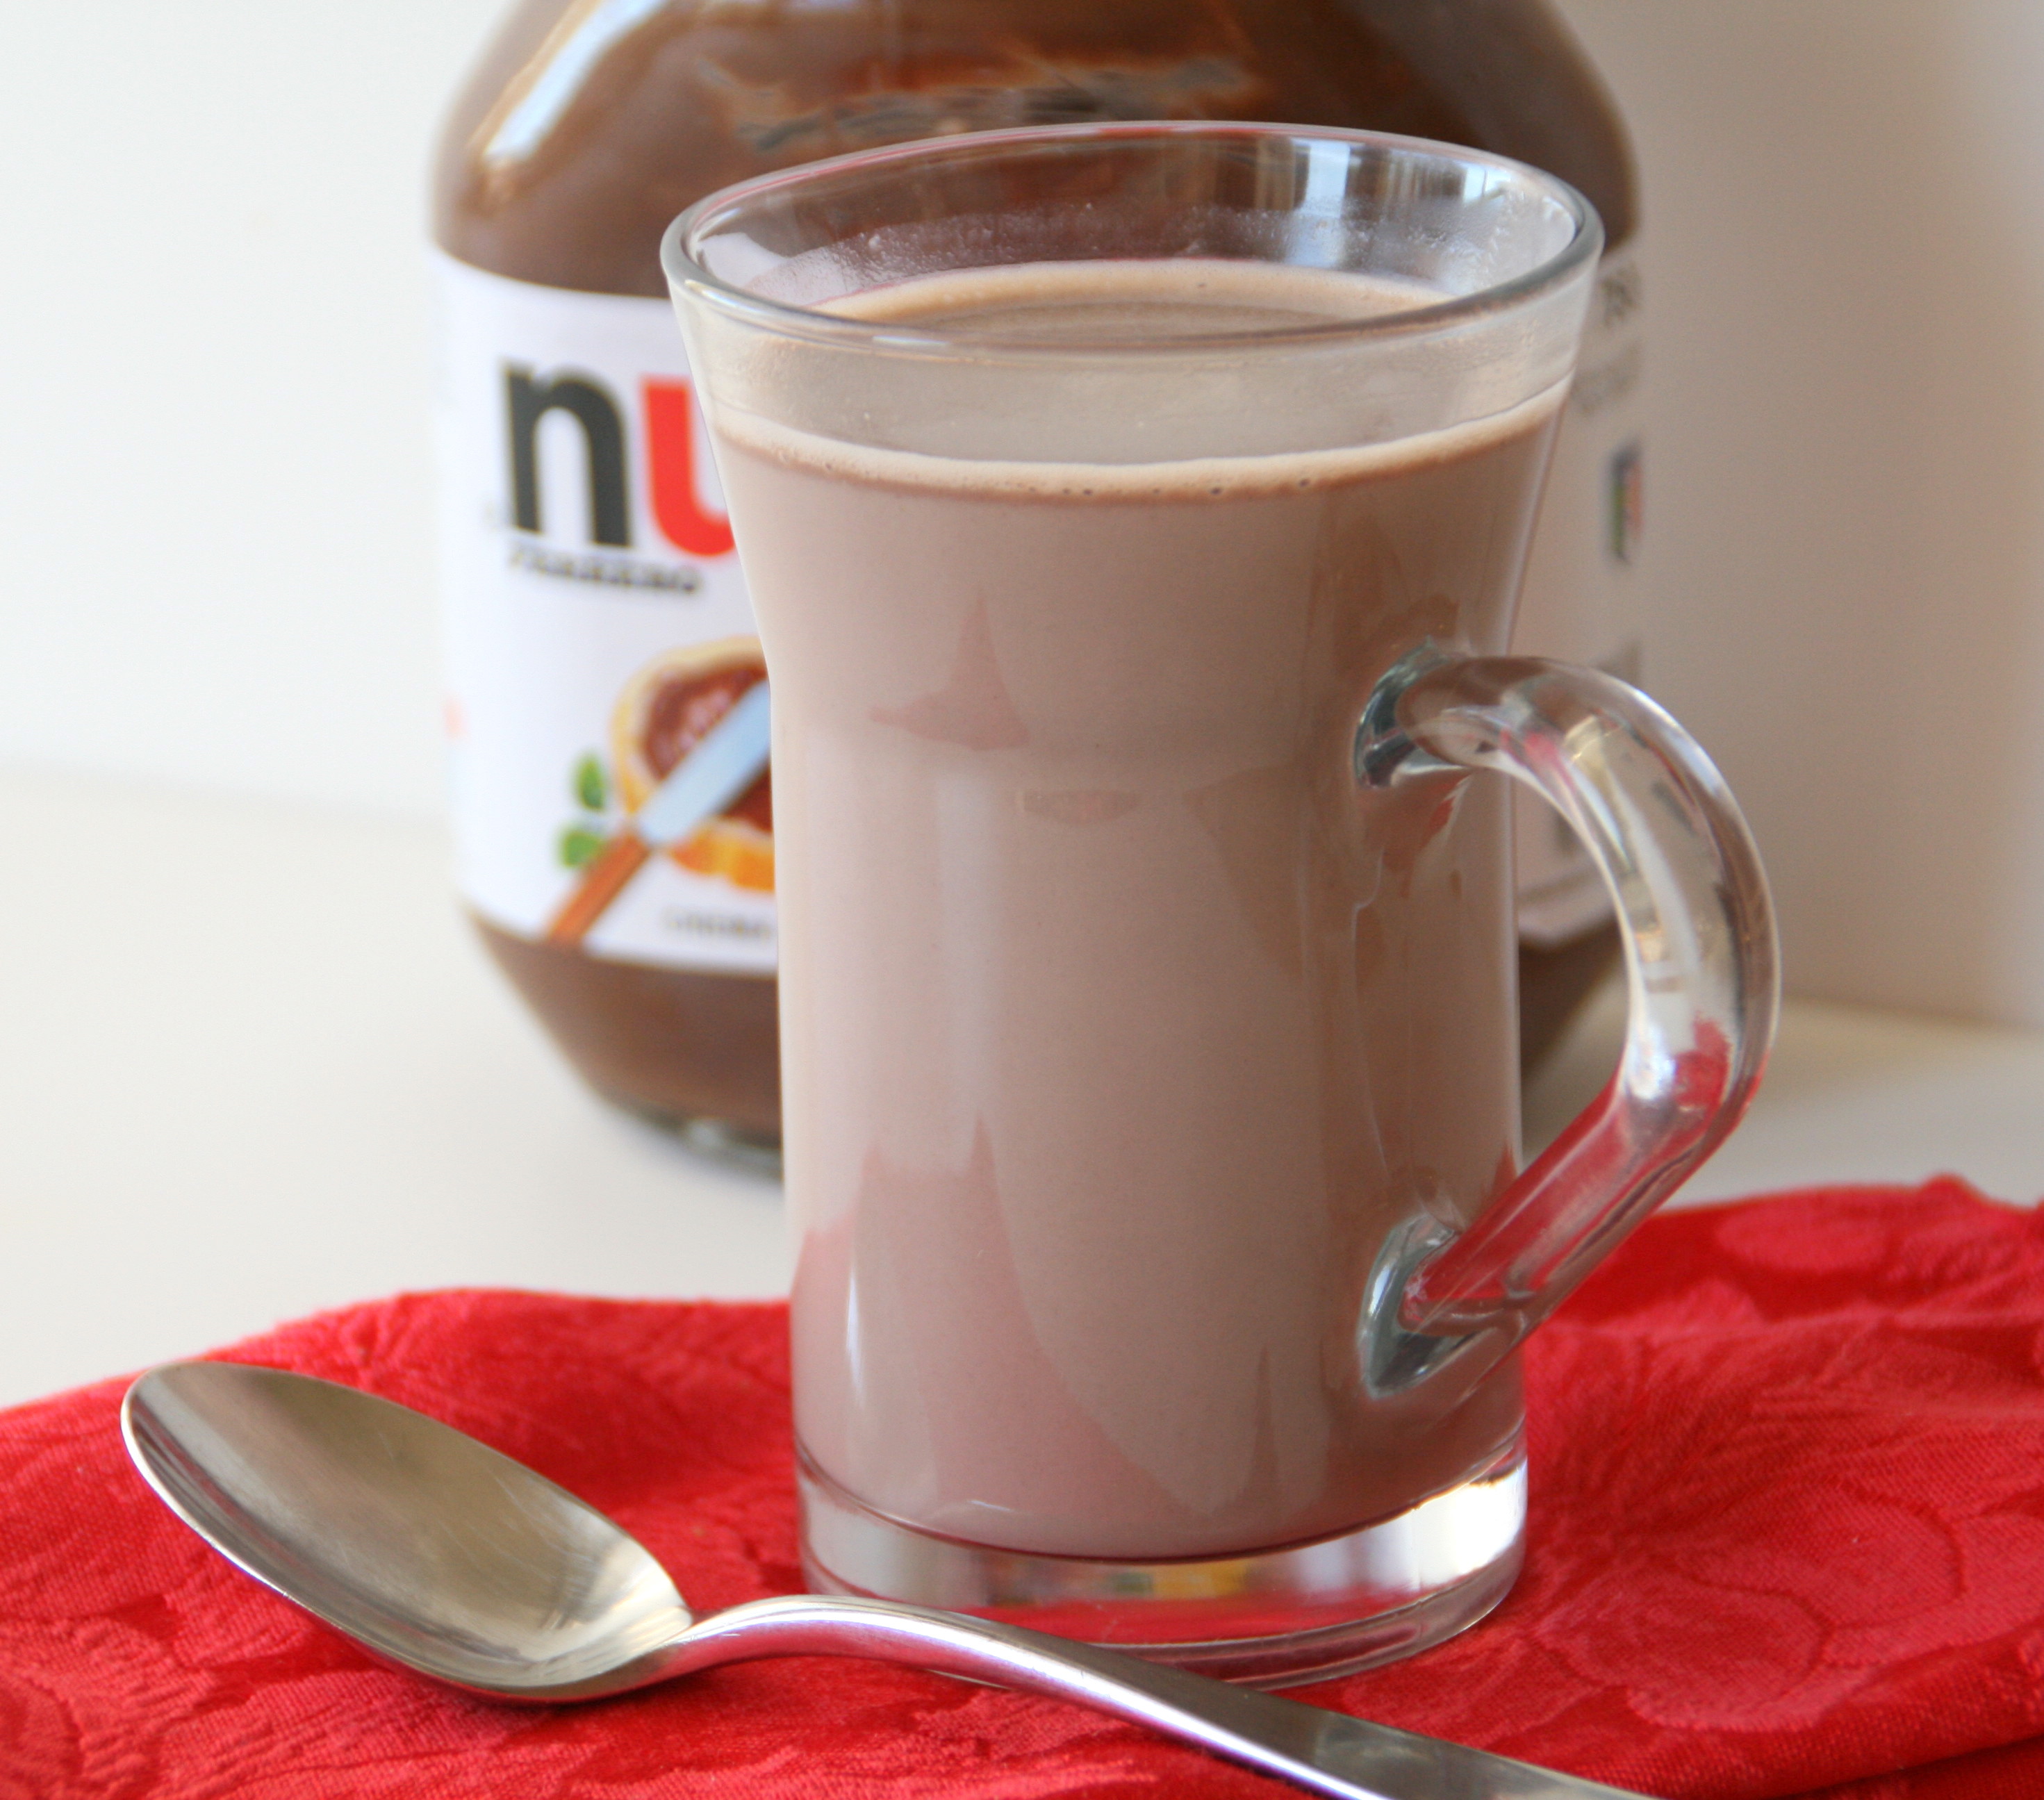 Nutella Hot Chocolate in a glass mug on a red napkin